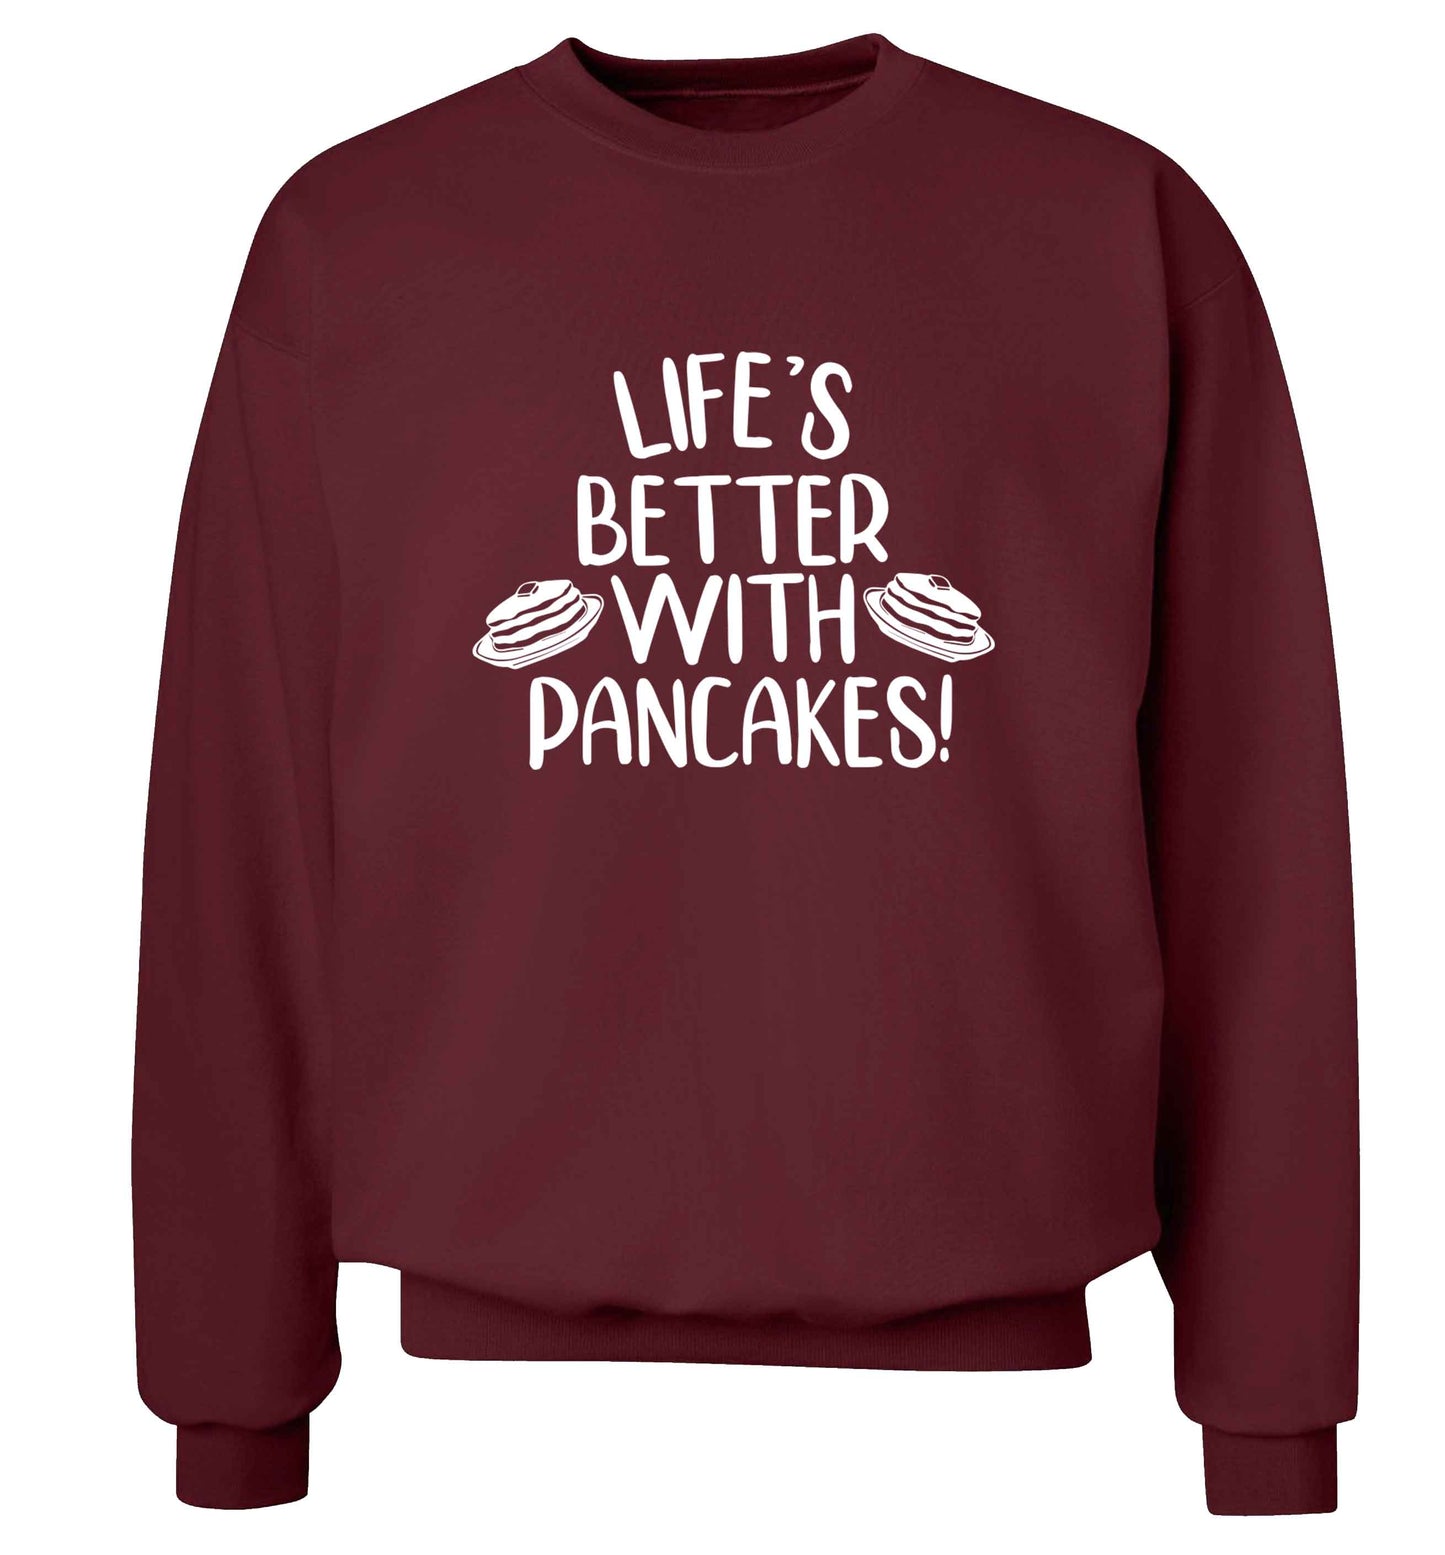 Life's better with pancakes adult's unisex maroon sweater 2XL